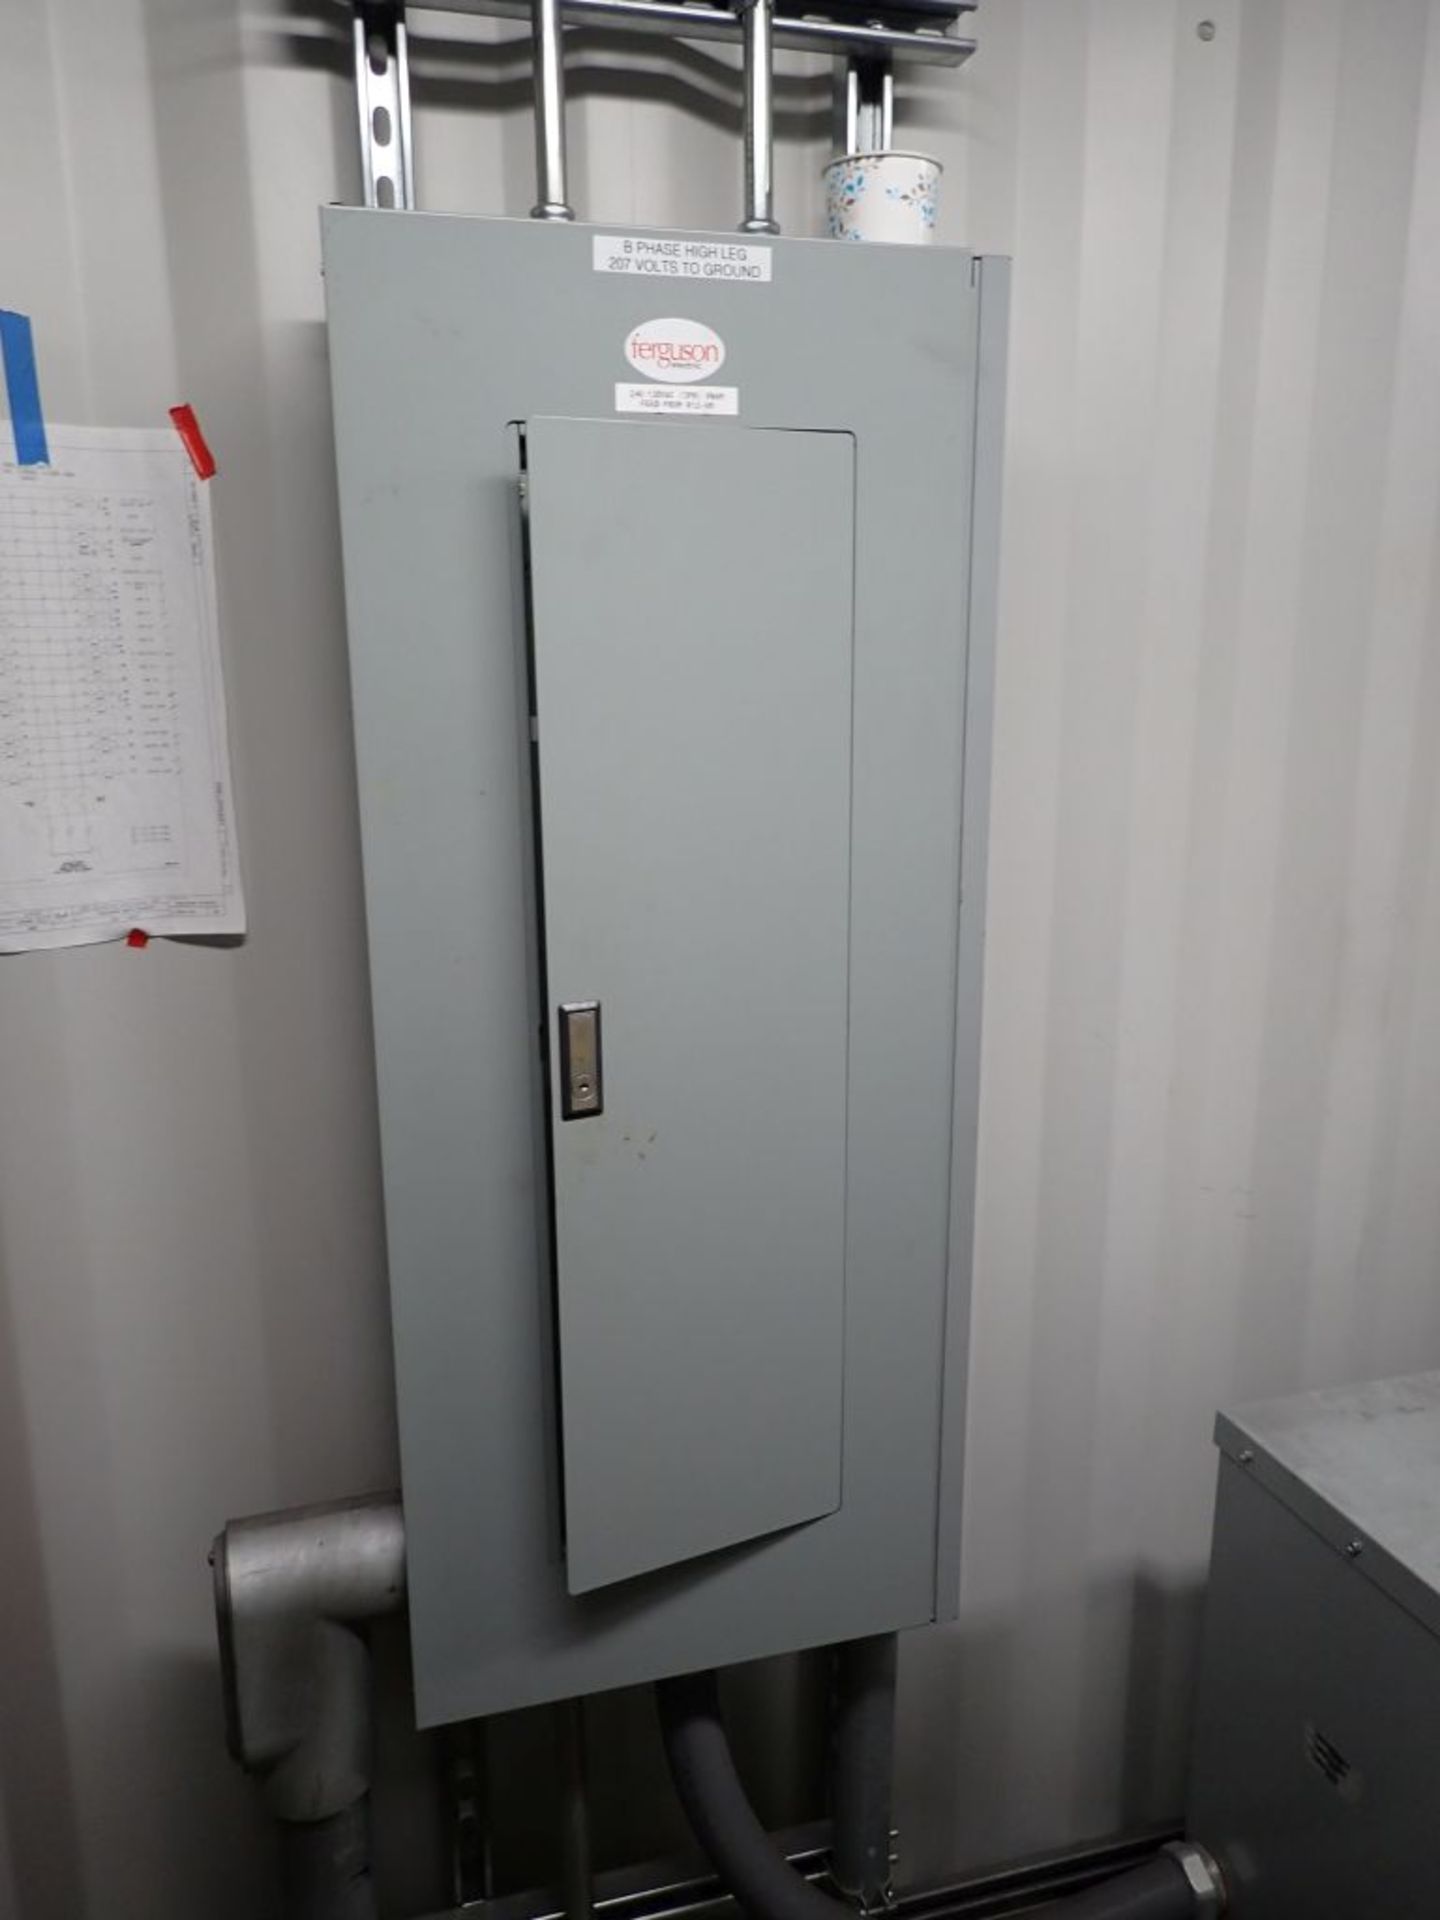 MCC Room with Switchgear and Drives in Container - Image 126 of 166